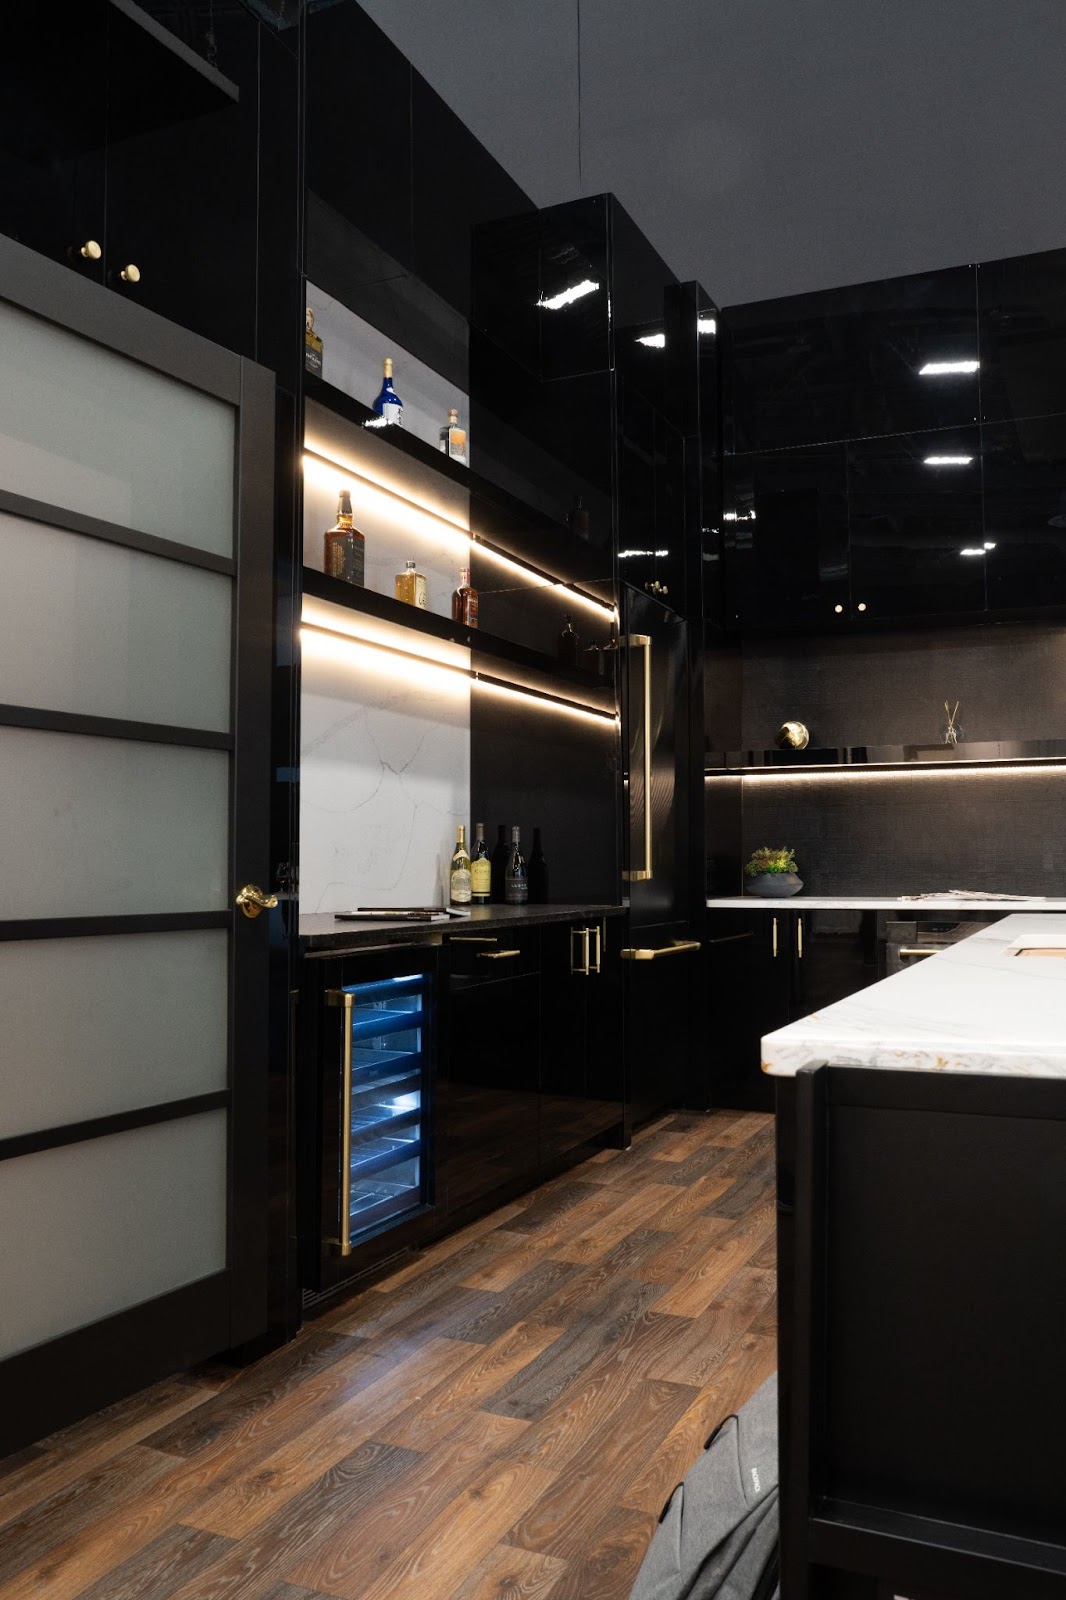 Modern kitchen design featuring high-gloss black cabinetry, gold accents, and under-cabinet lighting. A Touchstone built-in wine cooler is visible, alongside a variety of bottles on open shelving, set against a herringbone-patterned wooden floor.